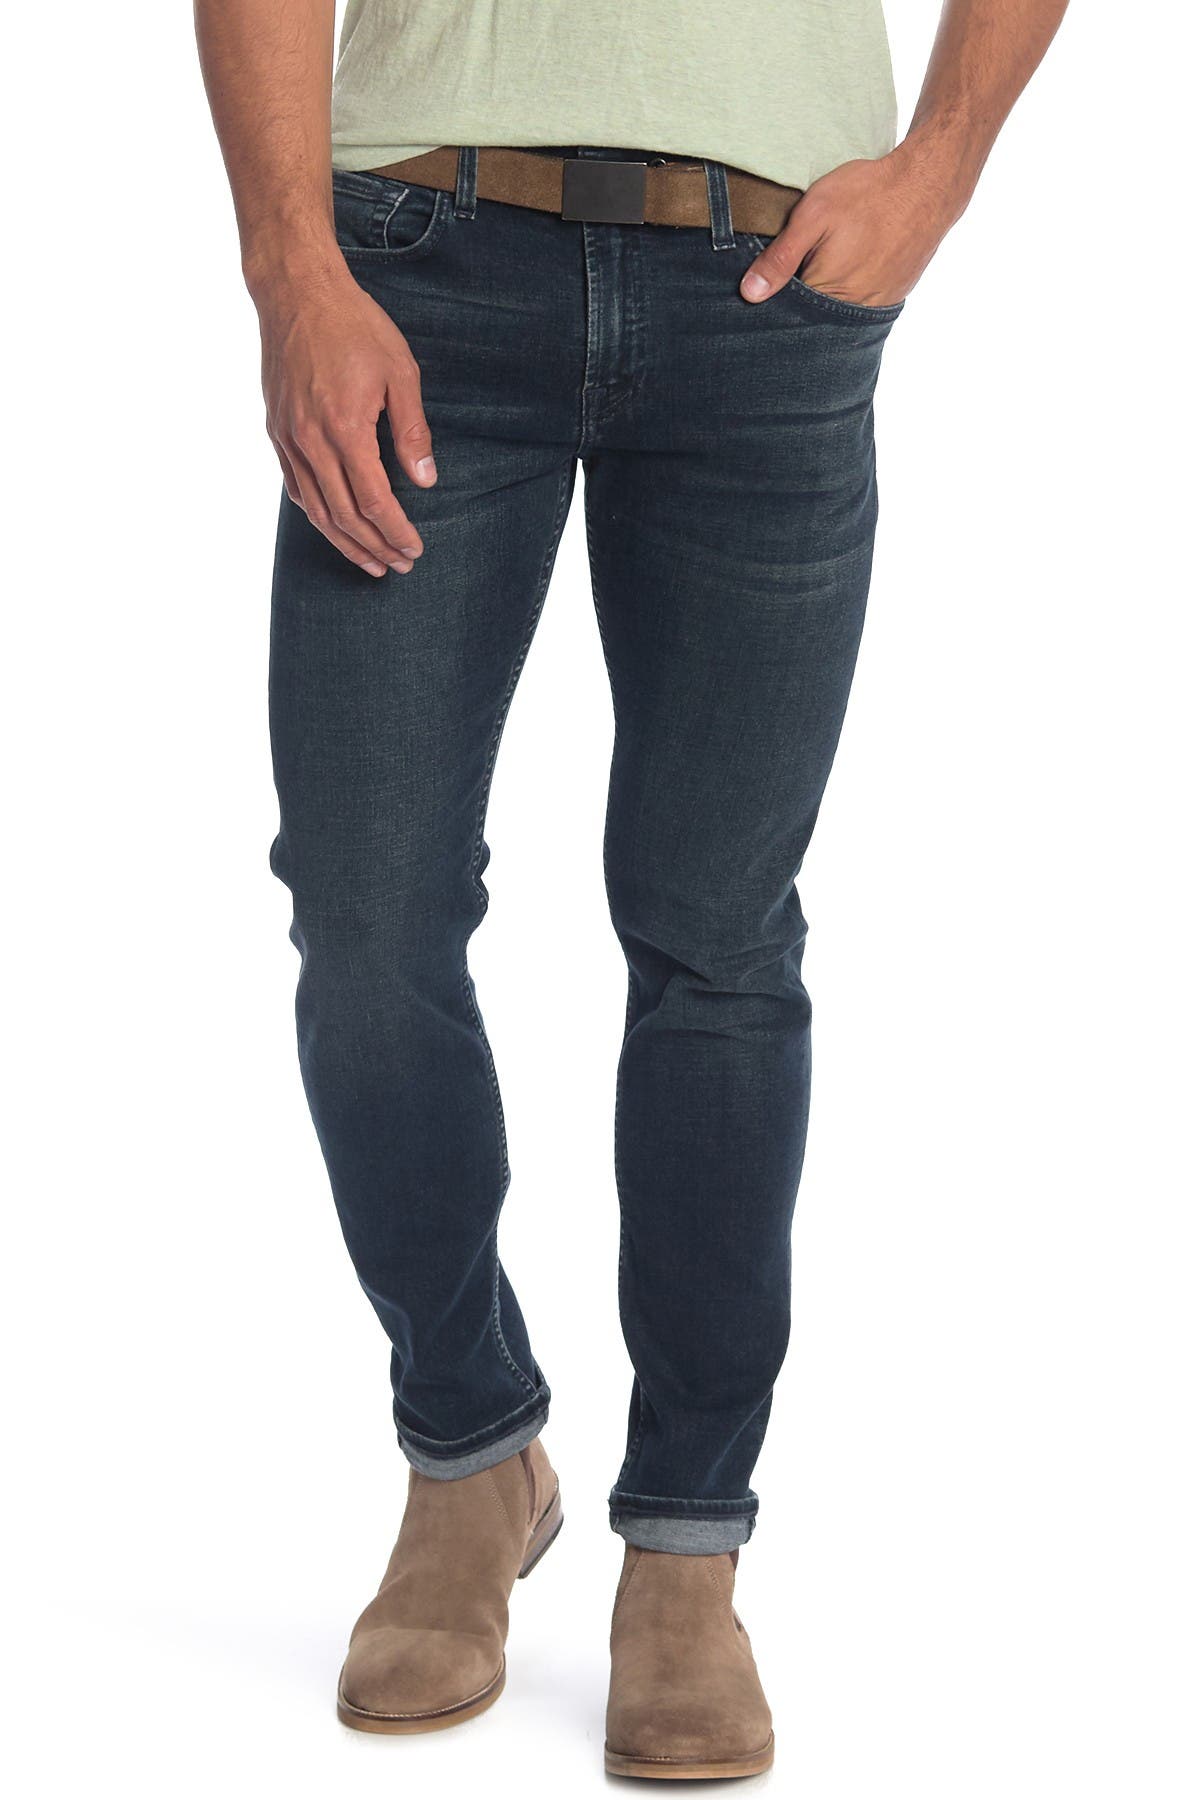 7 for all mankind mens skinny jeans